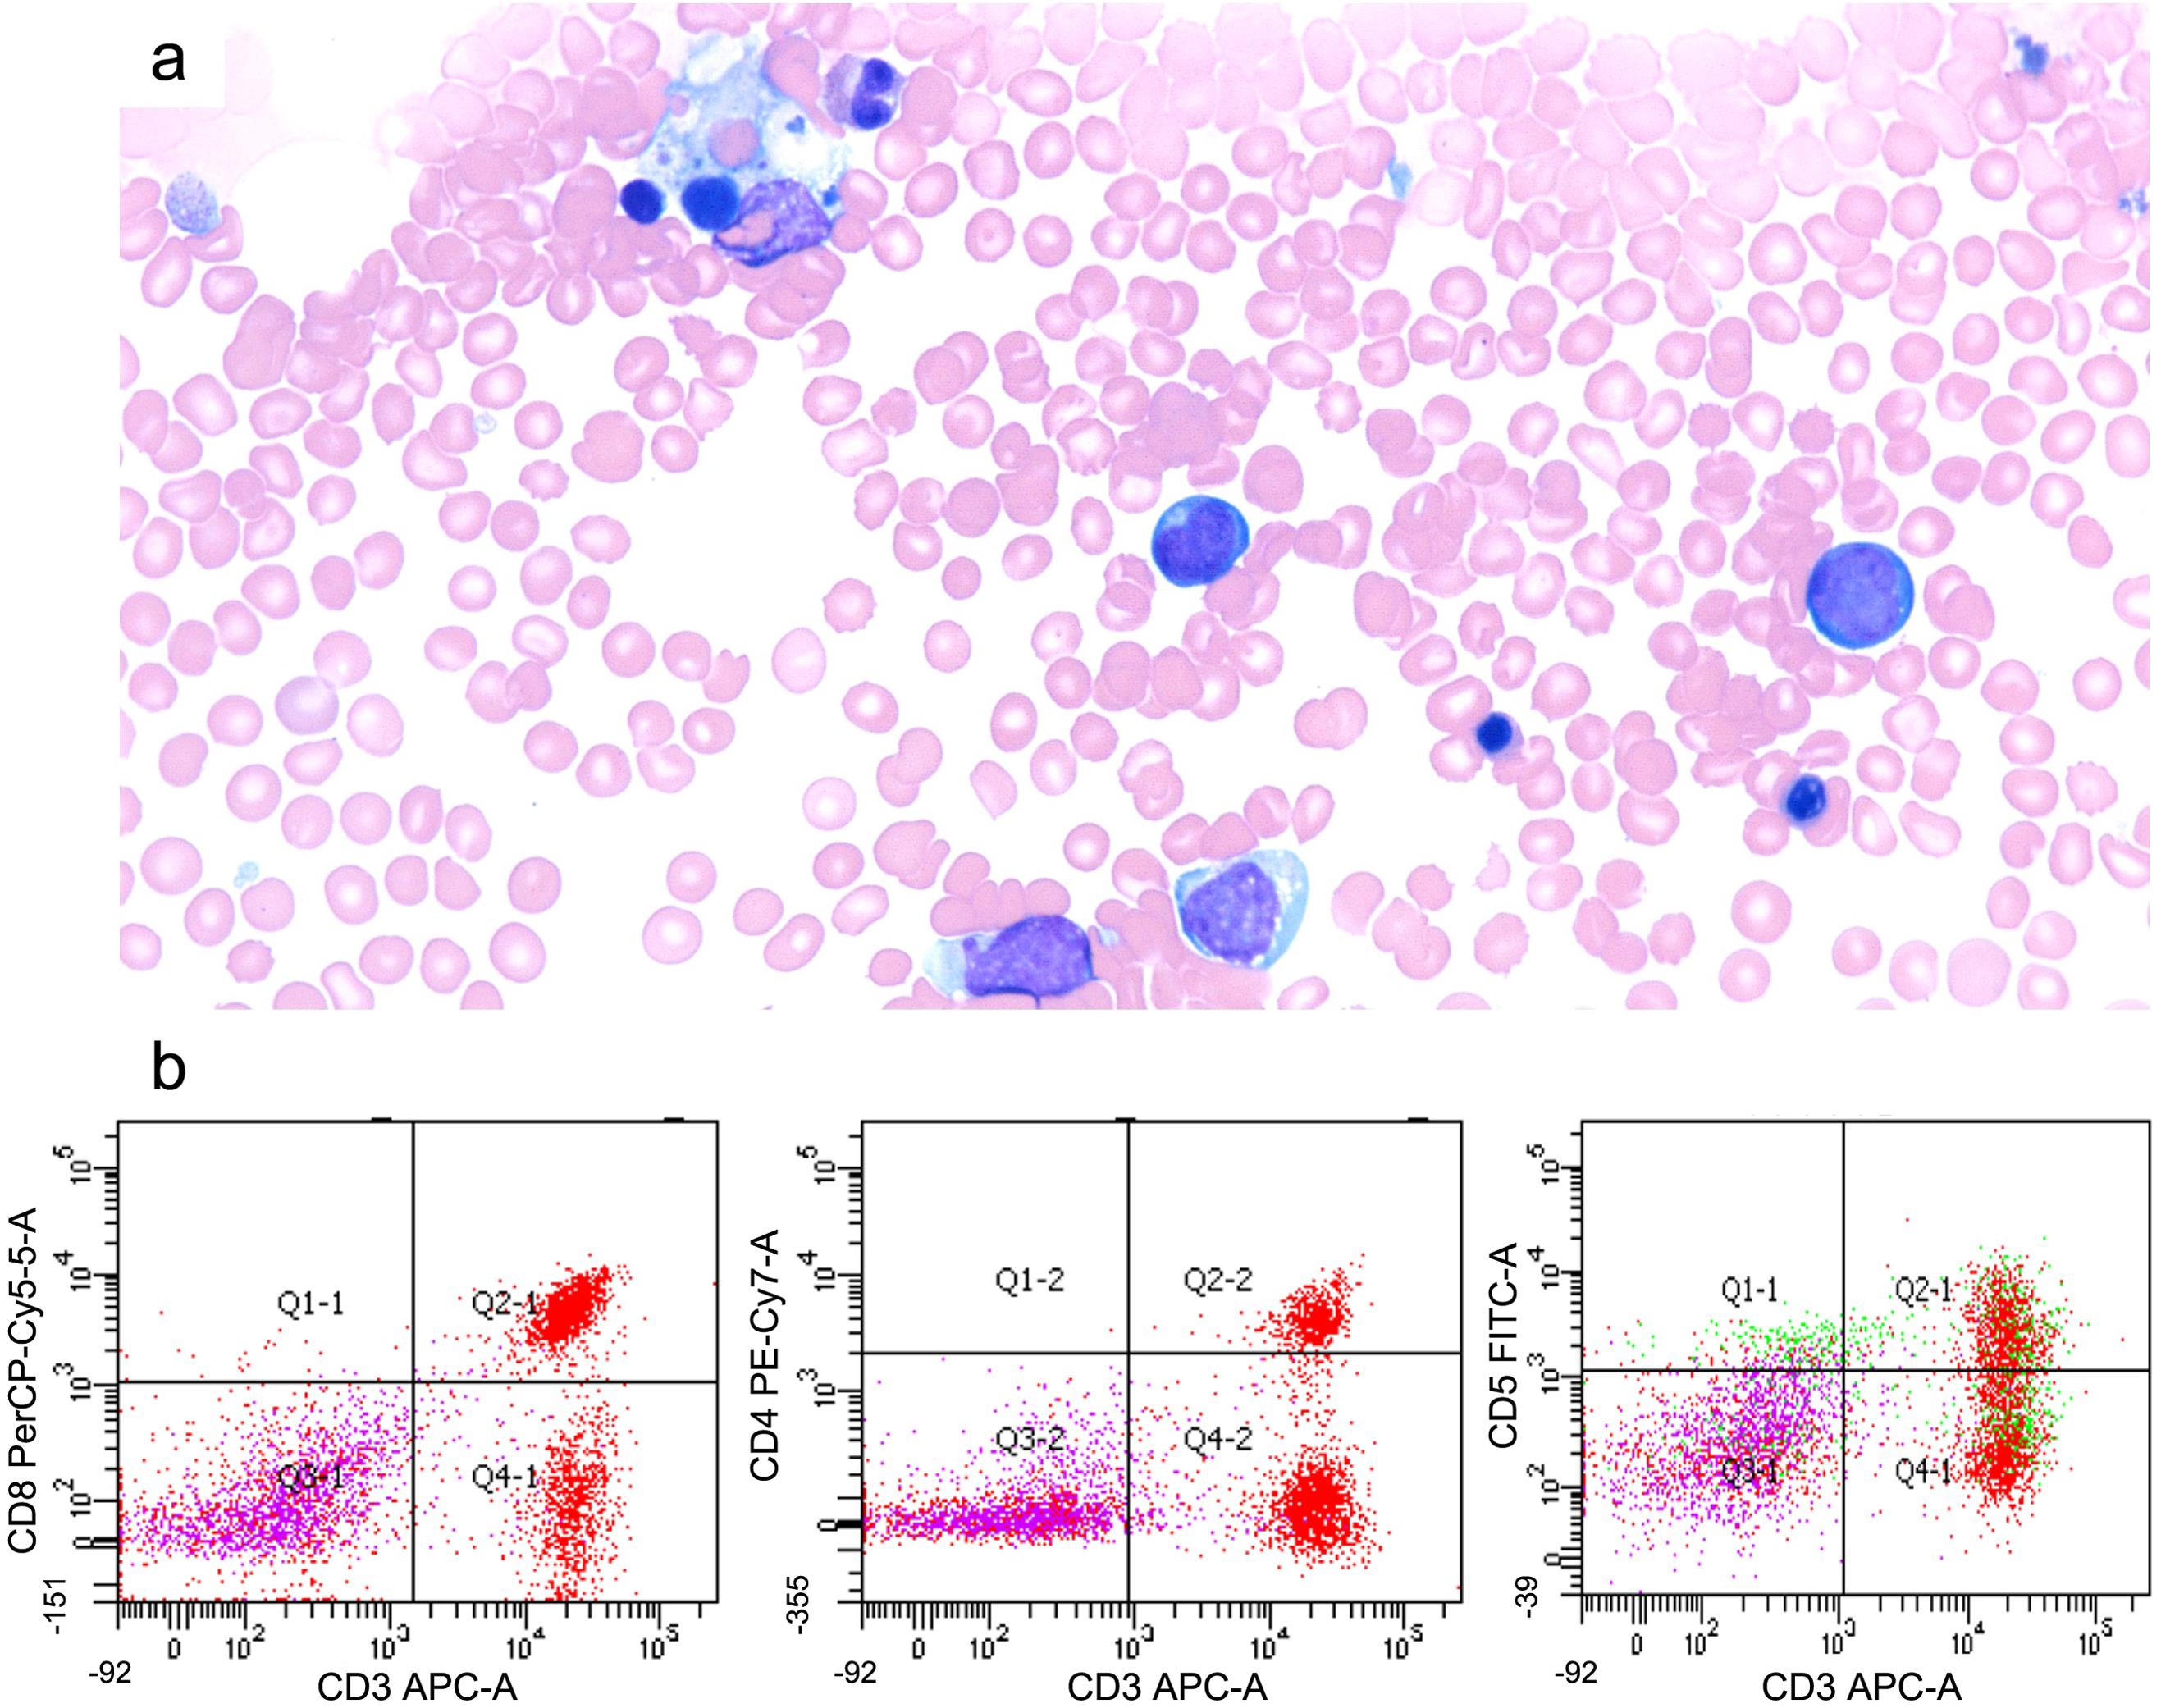 Example of aberrant T-cell population in familial hemophagocytic lymphohistiocytosis.